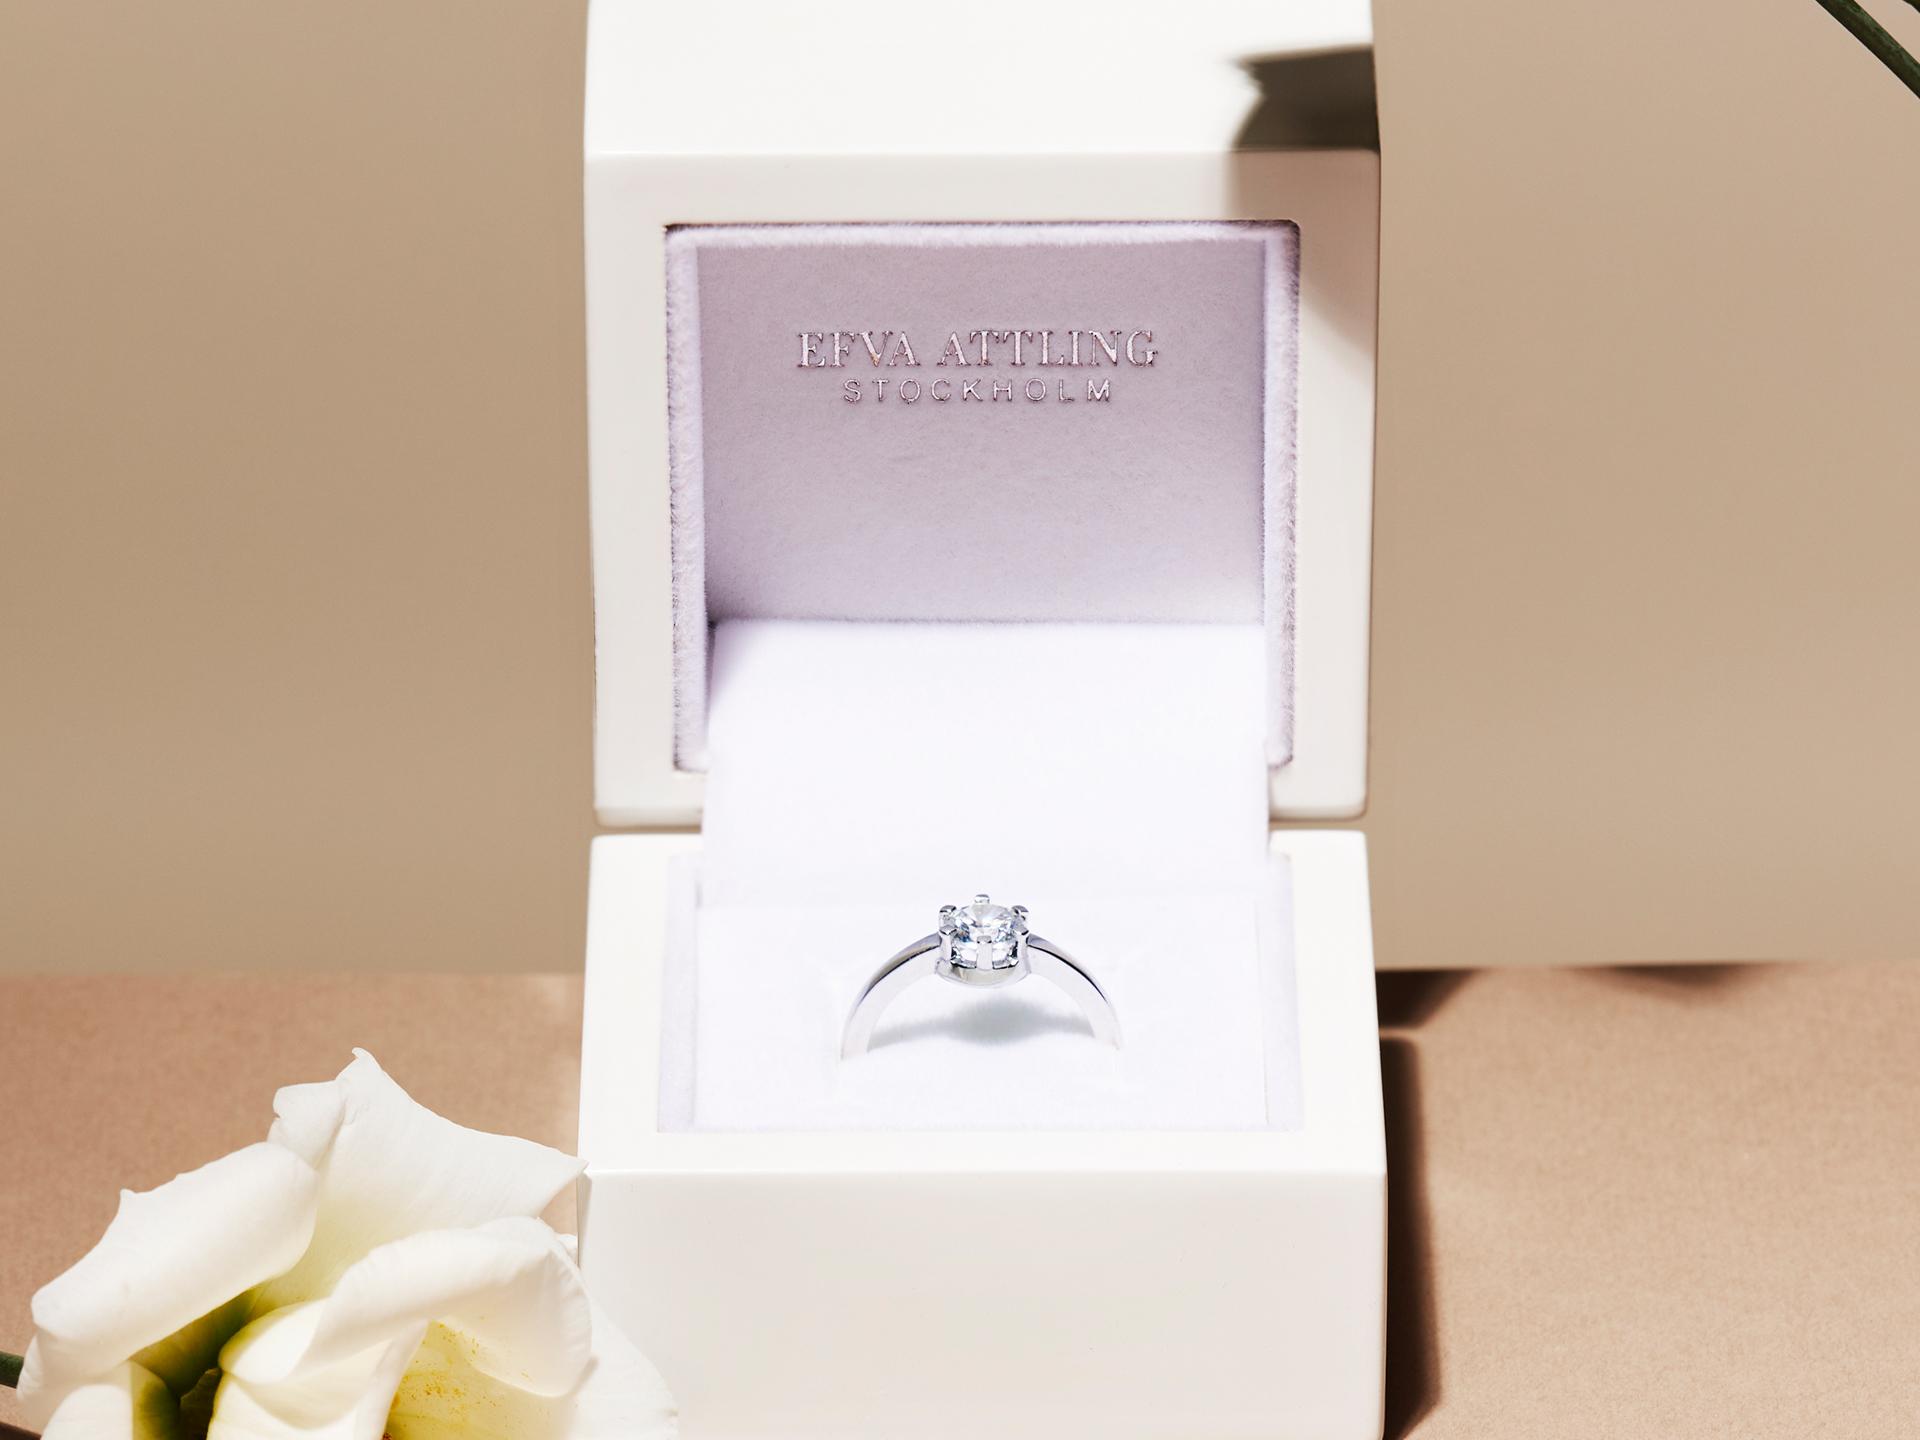 Efva Attling - Rent A Ring To Your Proposal